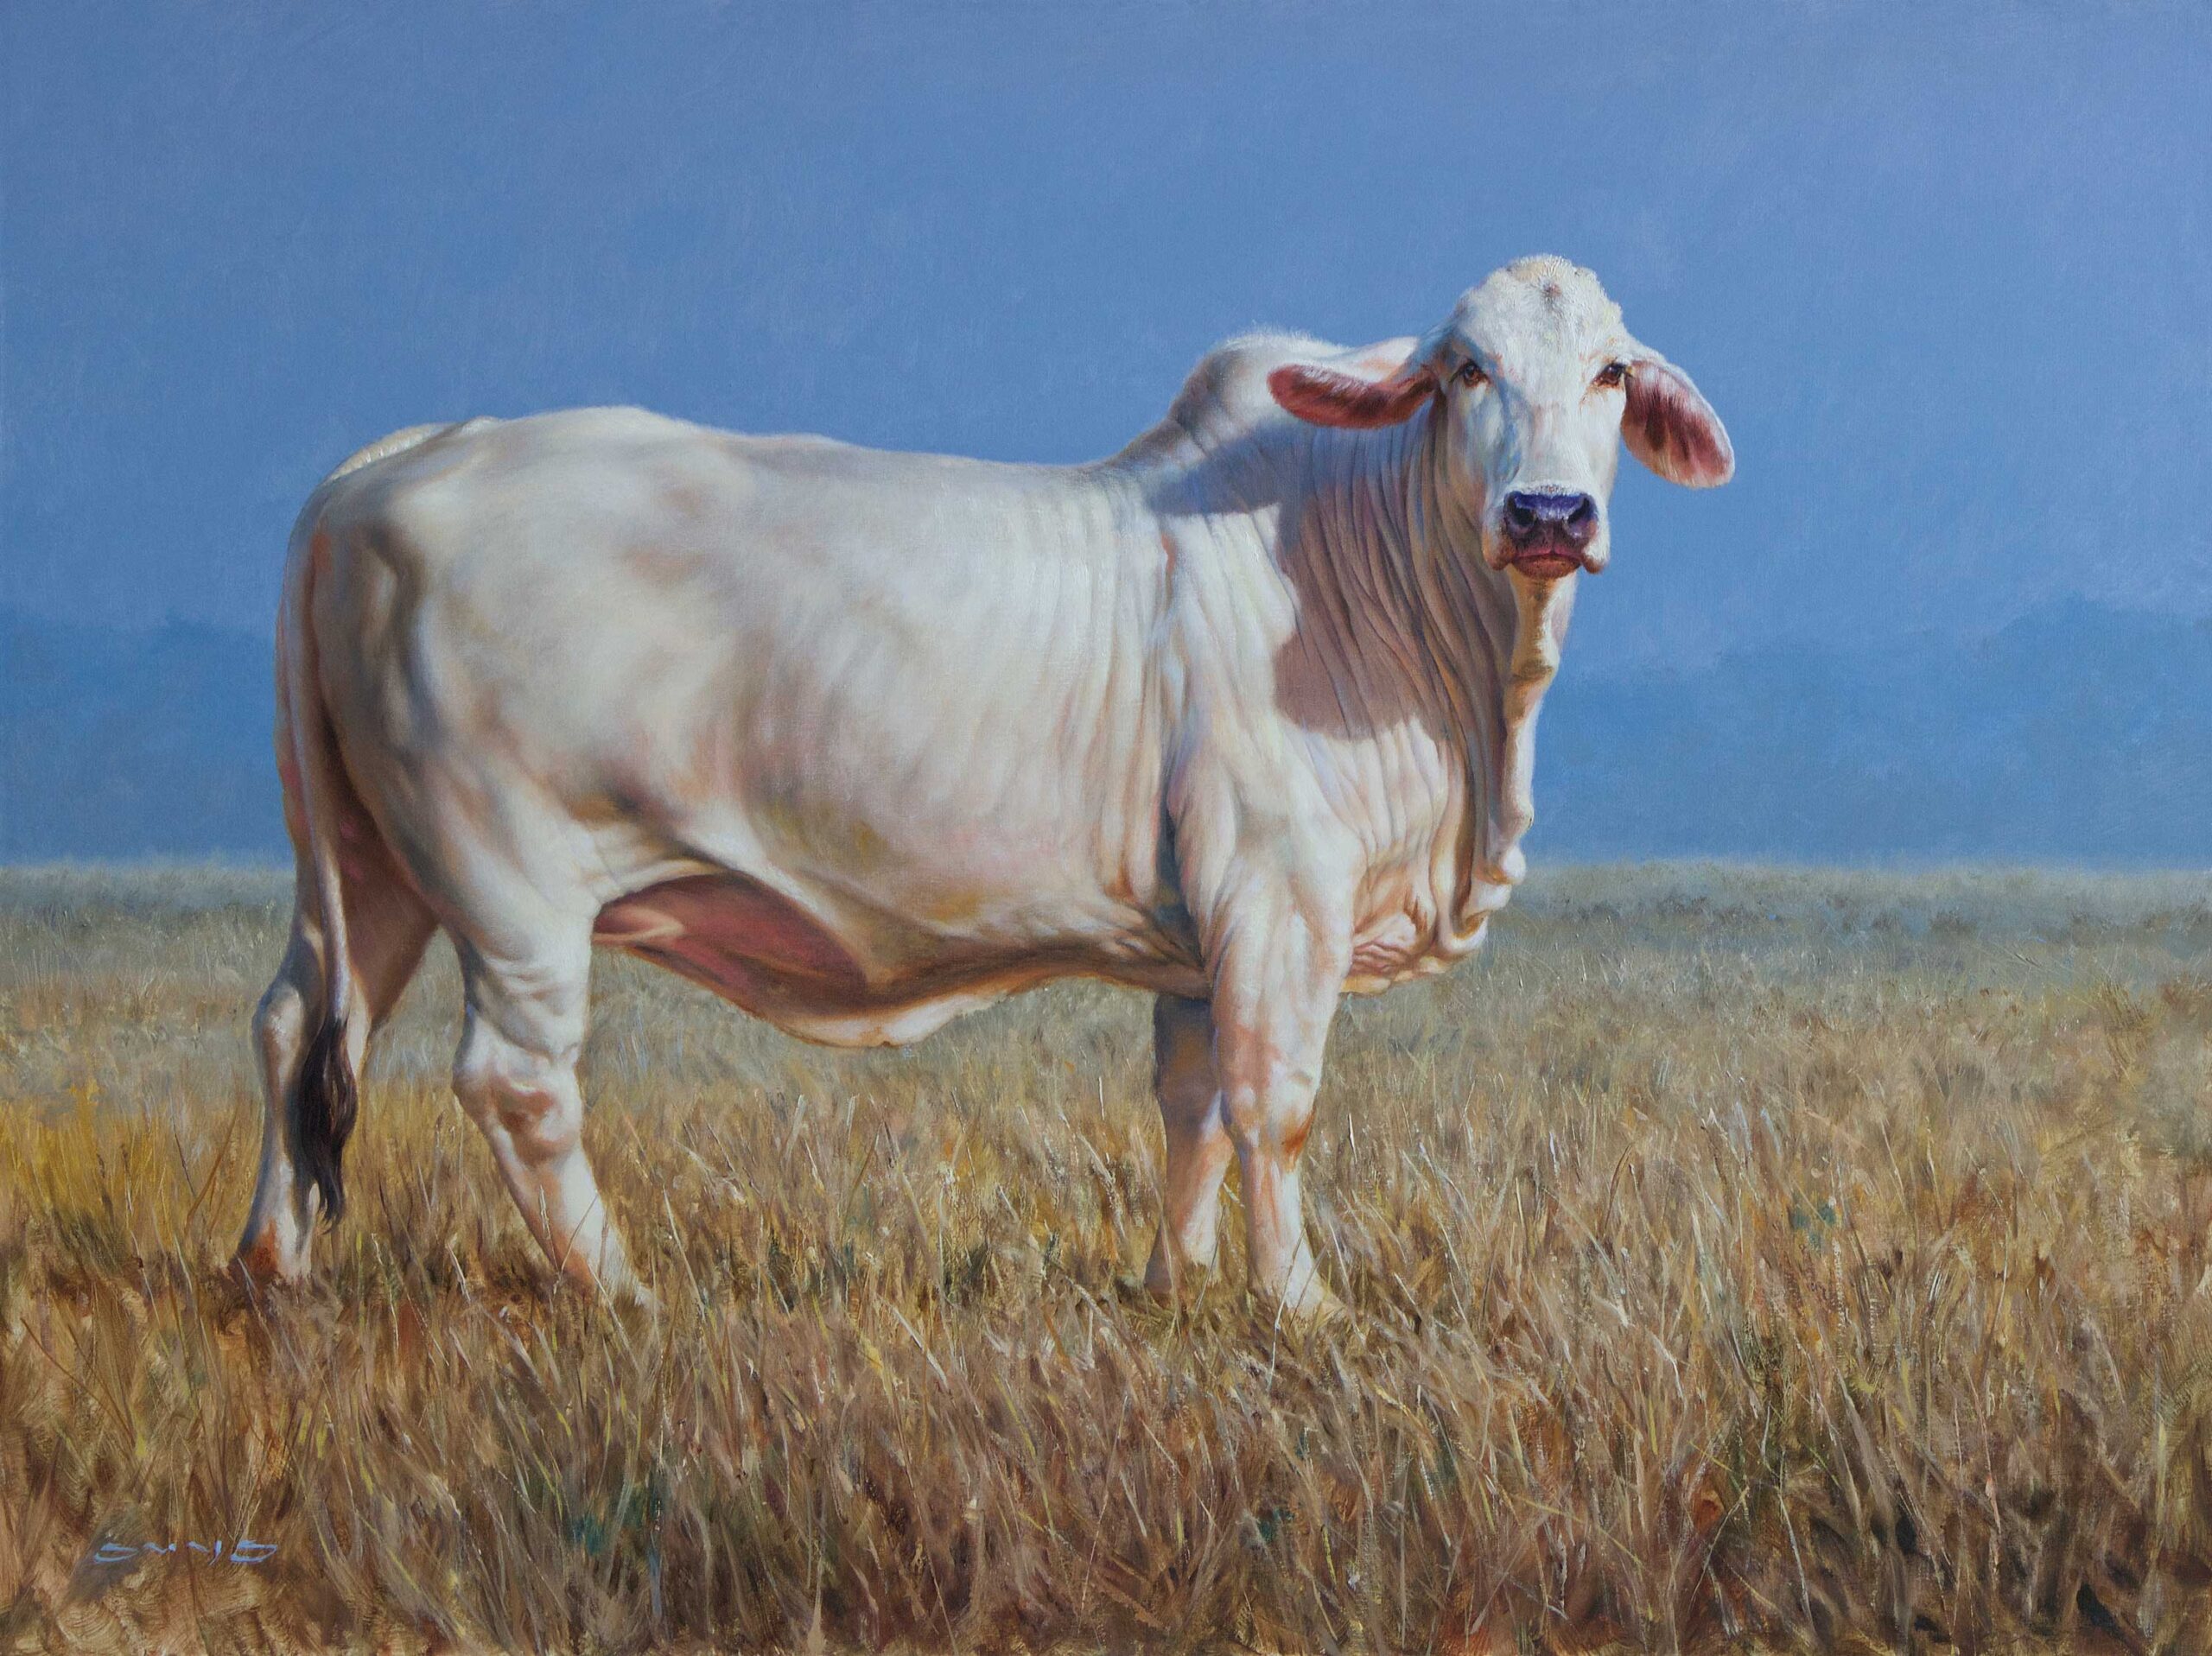 William Suys, “Morning Mist,” 36 x 48 in. - painting of a white cow